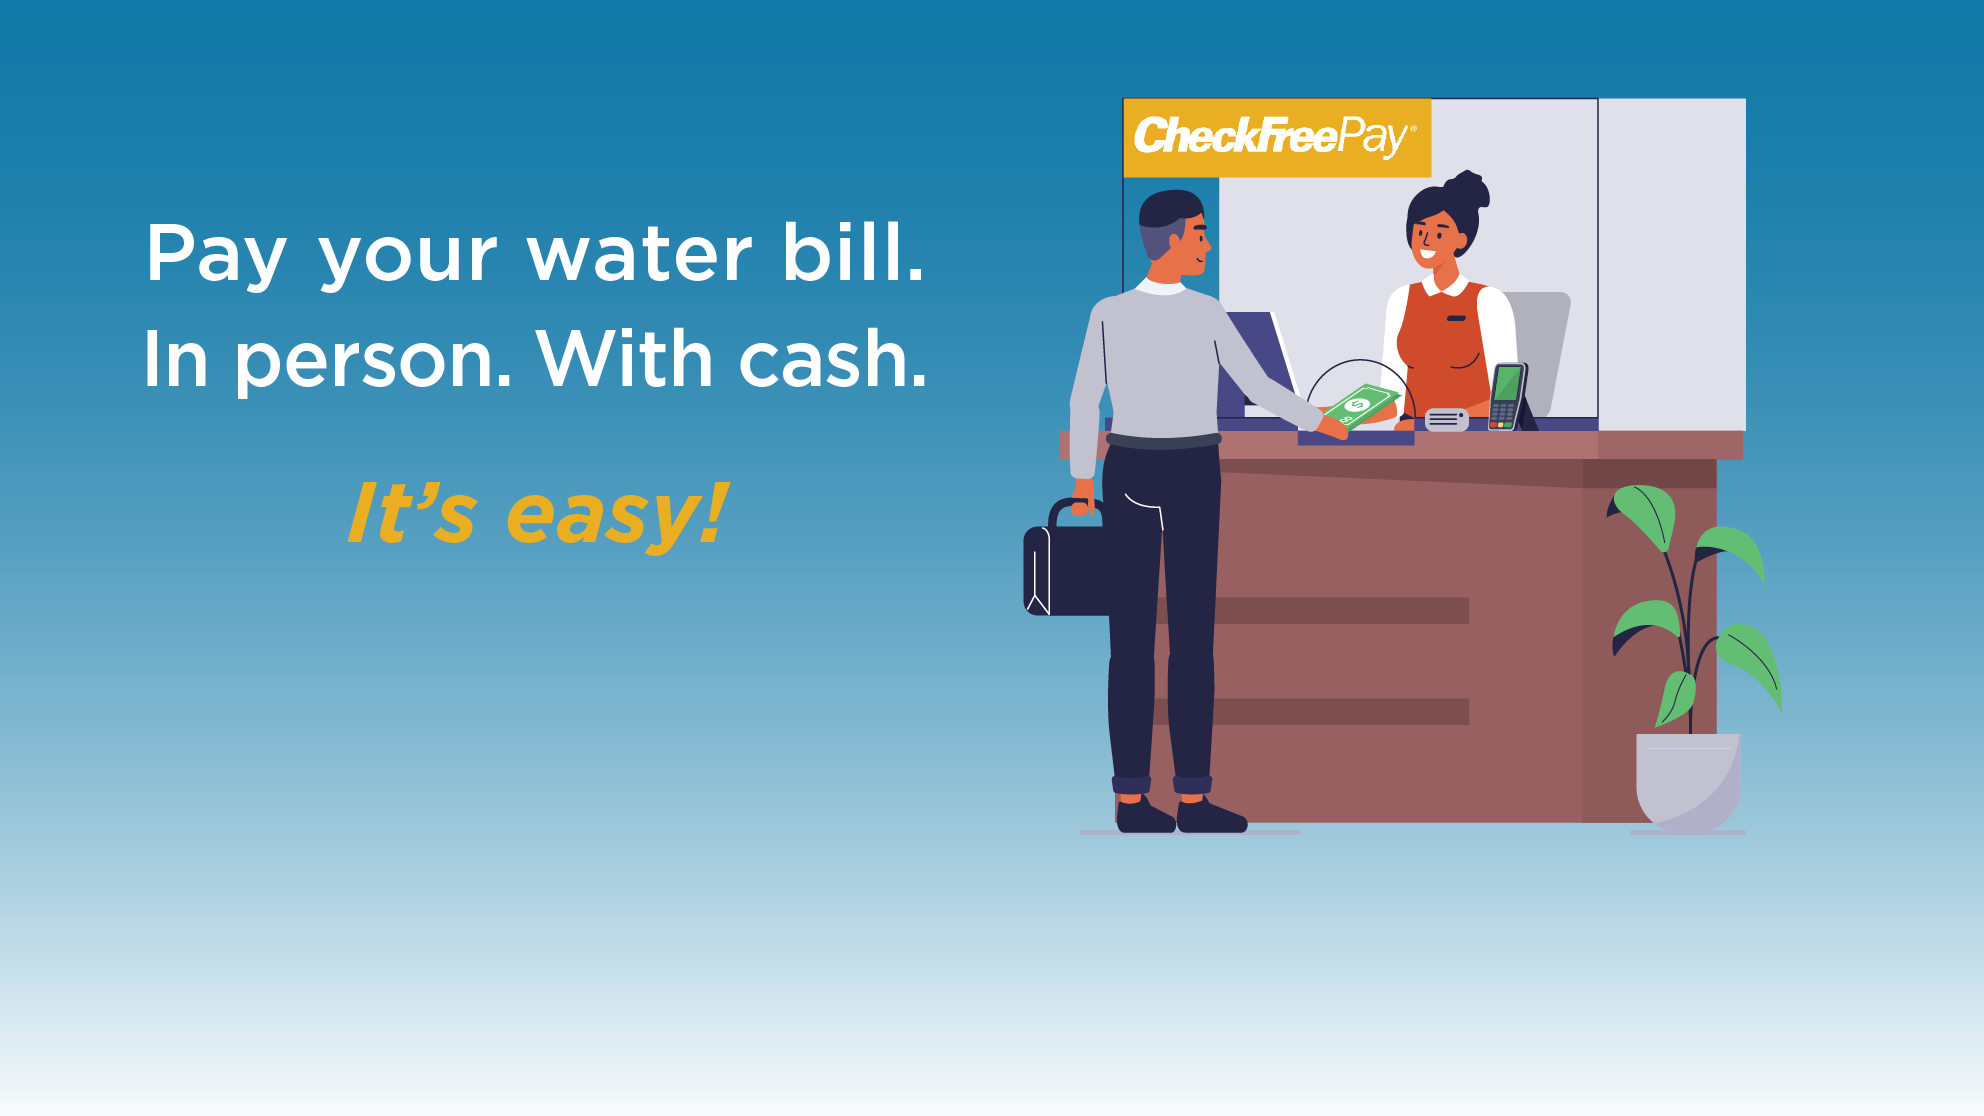 Graphic with text "Pay your water bill in person. With cash. It's easy!"